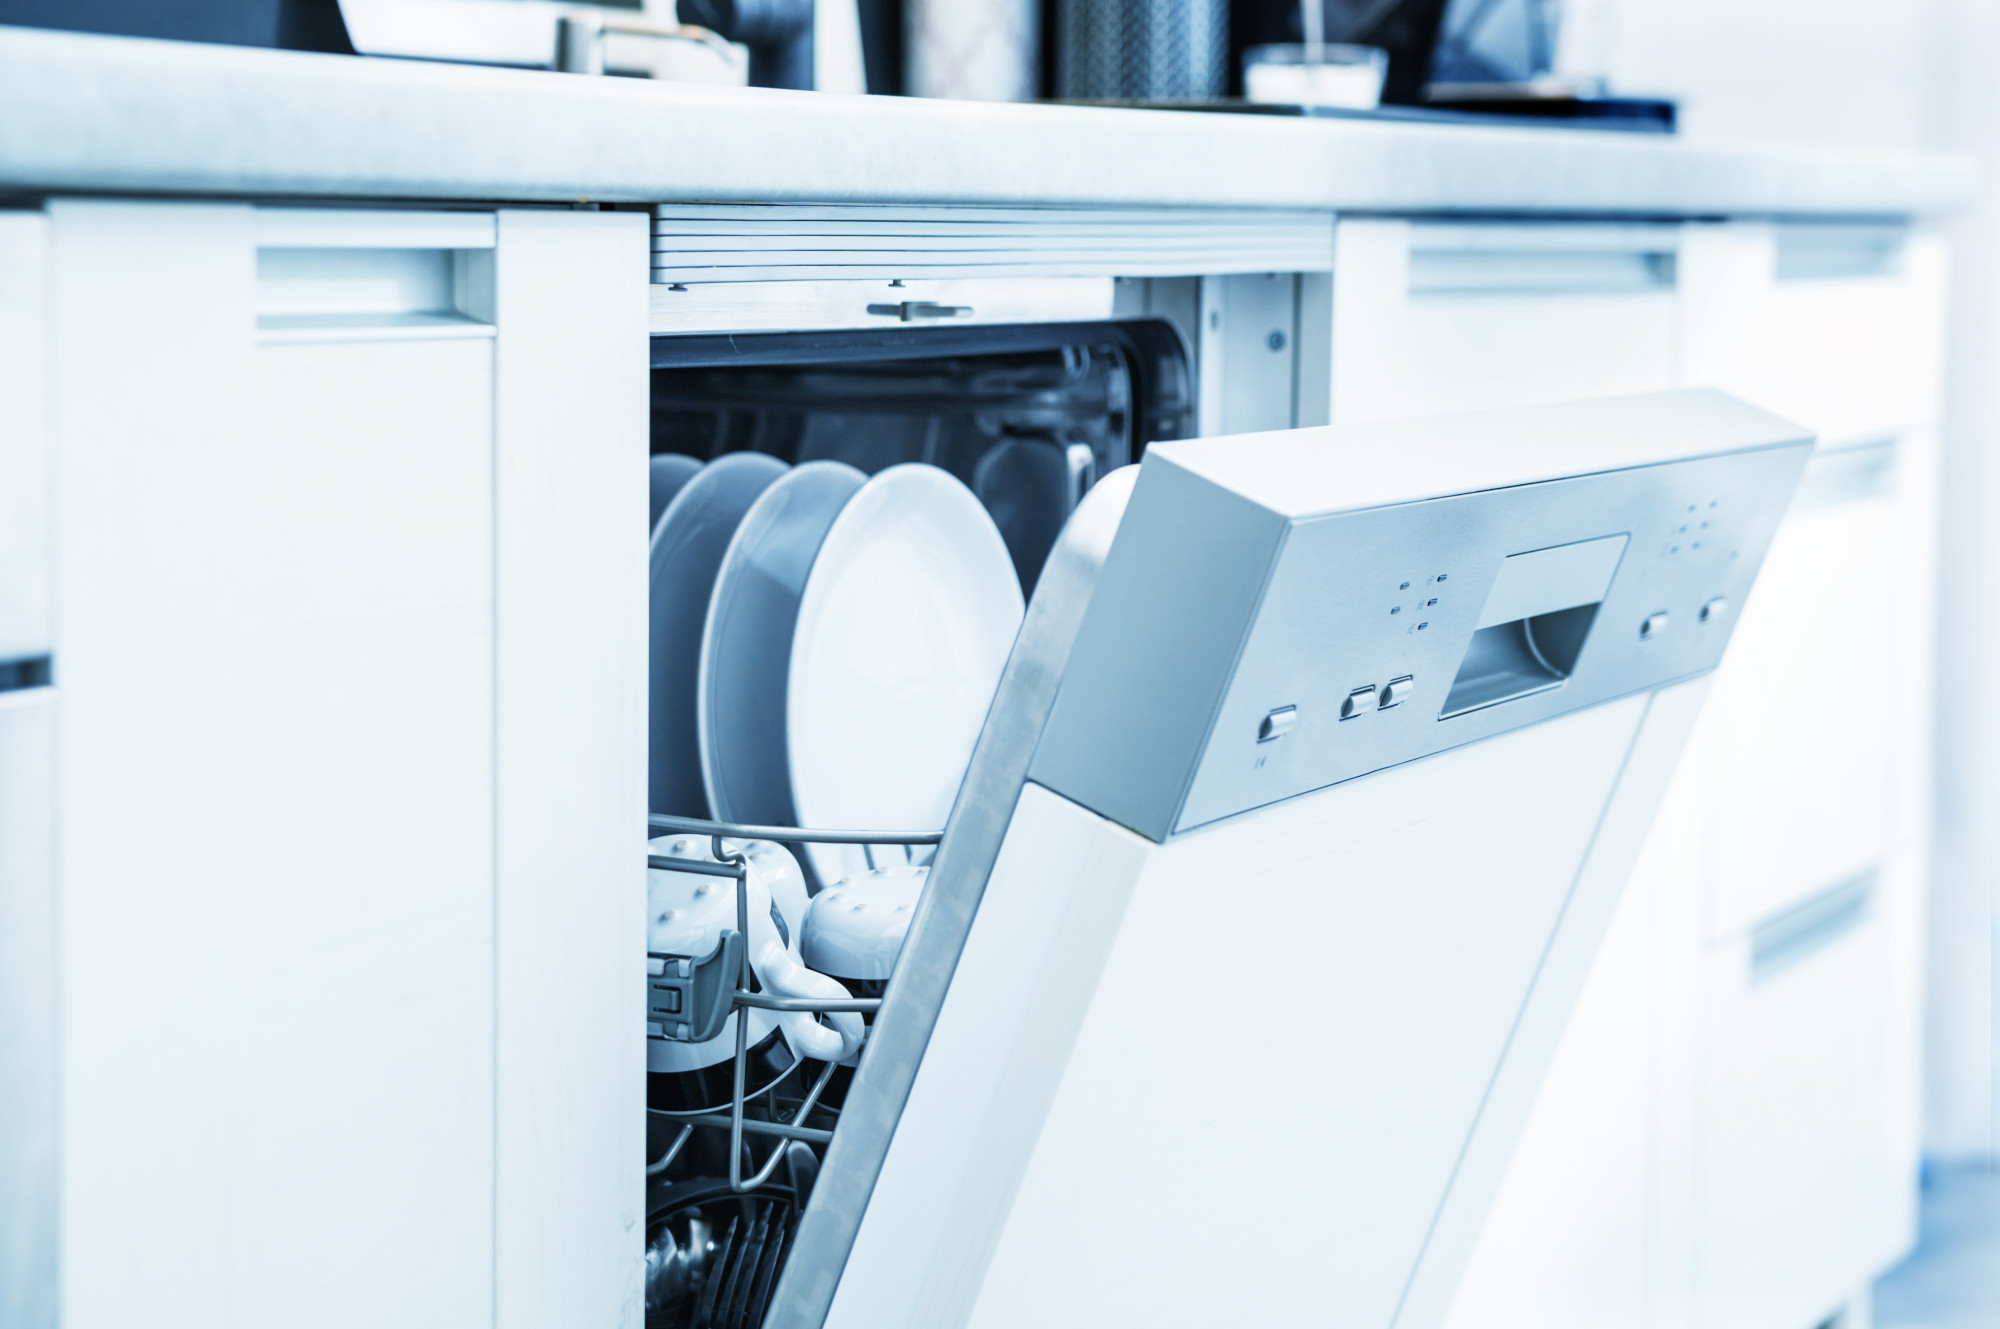 Before you buy and install a dishwasher, you should know the prices you can expect to pay. Luckily, this guide has you covered.